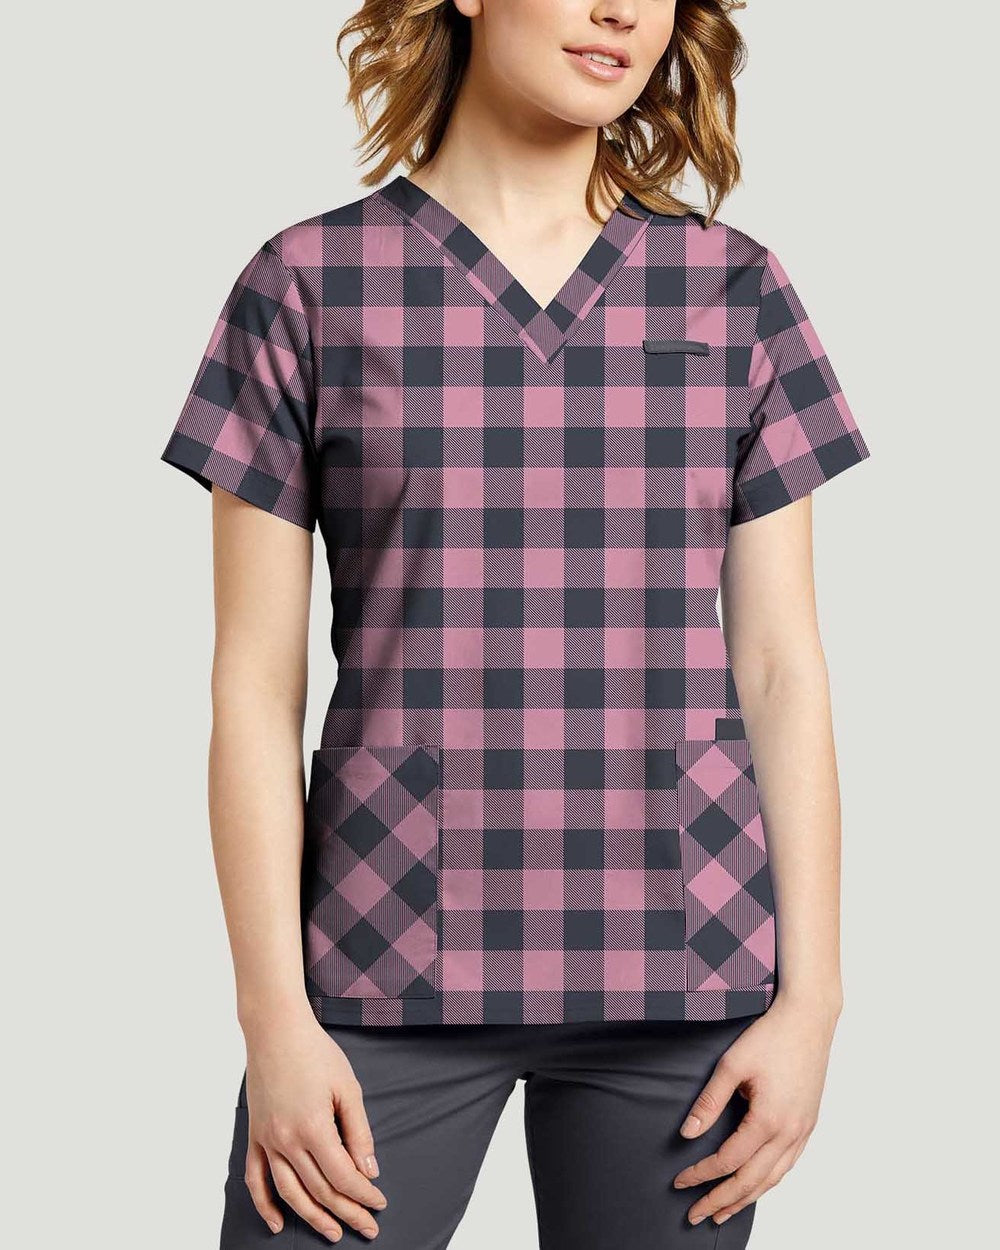 White Cross ORCHID PLAID PRINTED V-NECK TOP